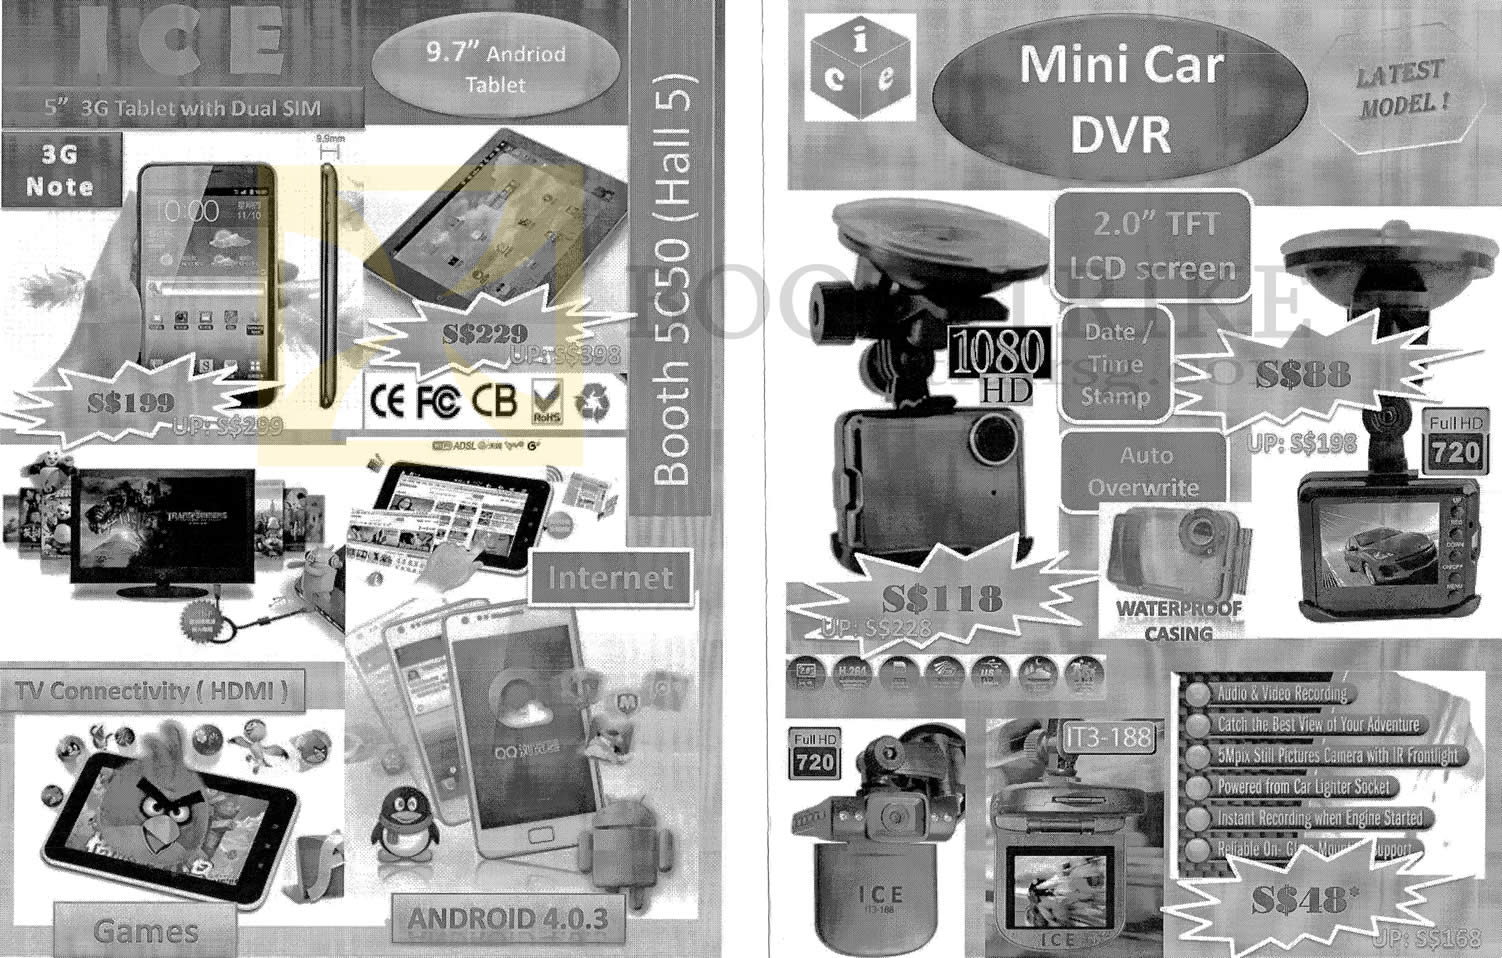 SITEX 2012 price list image brochure of IT3 Ice 3G Note Android Tablet, Mini Car DVR Blackbox Video Recorder IT3-188